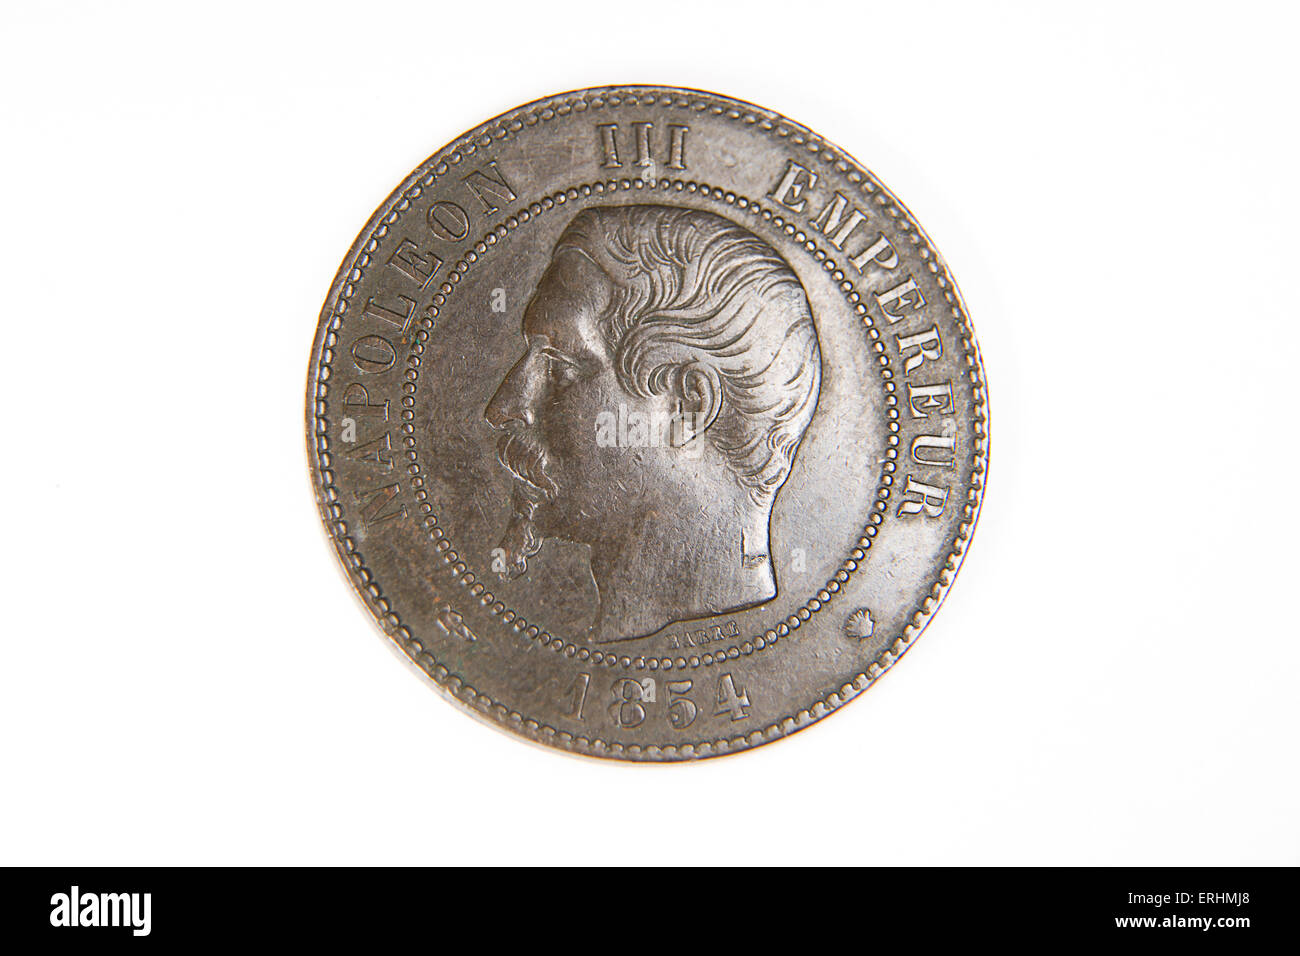 Old bronze coin with portrait of king on a white background Stock Photo